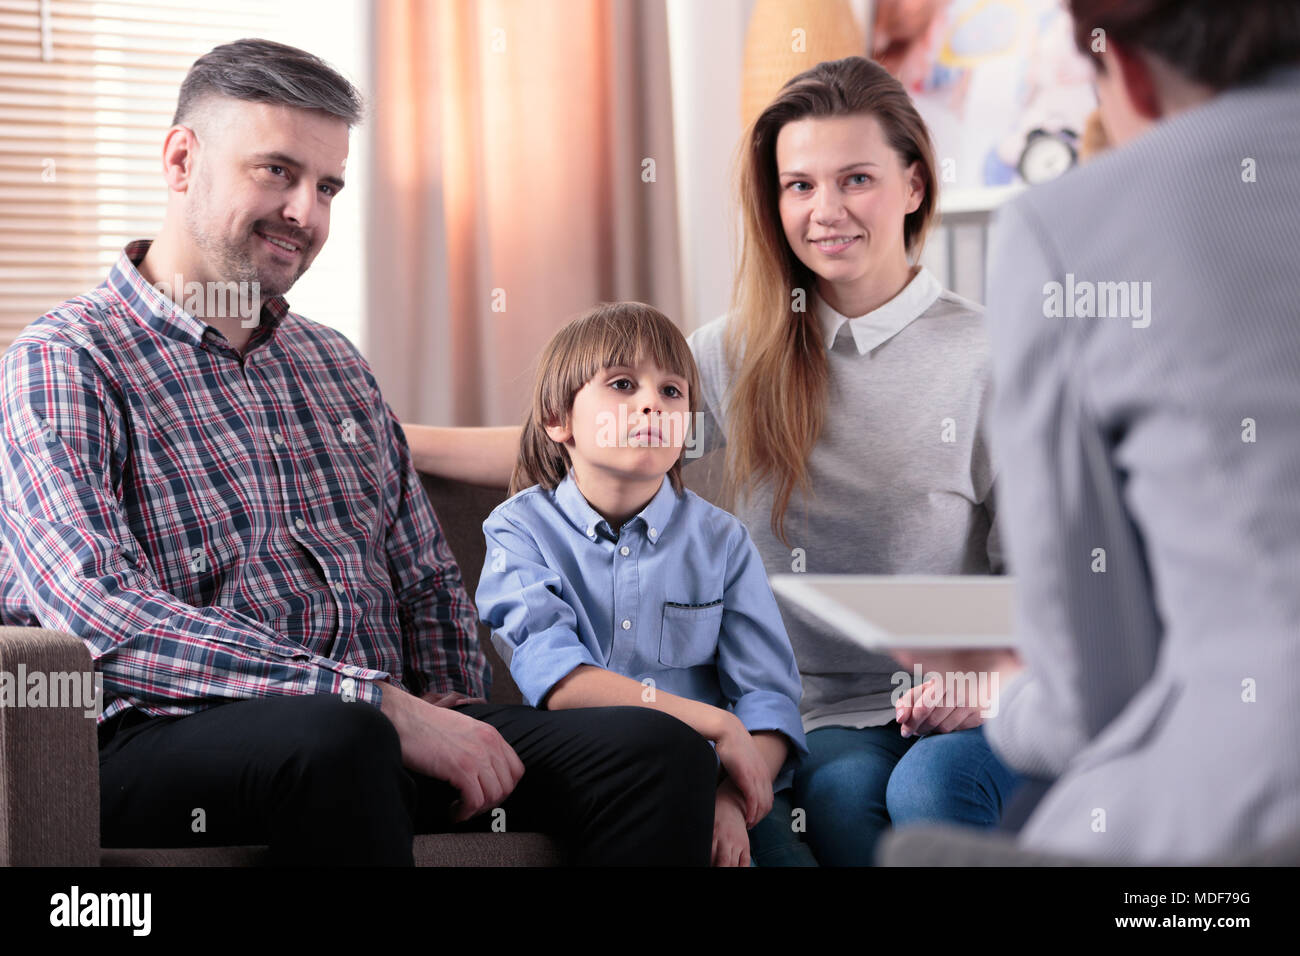 Happy marriage with their son during a meeting with counselor Stock Photo